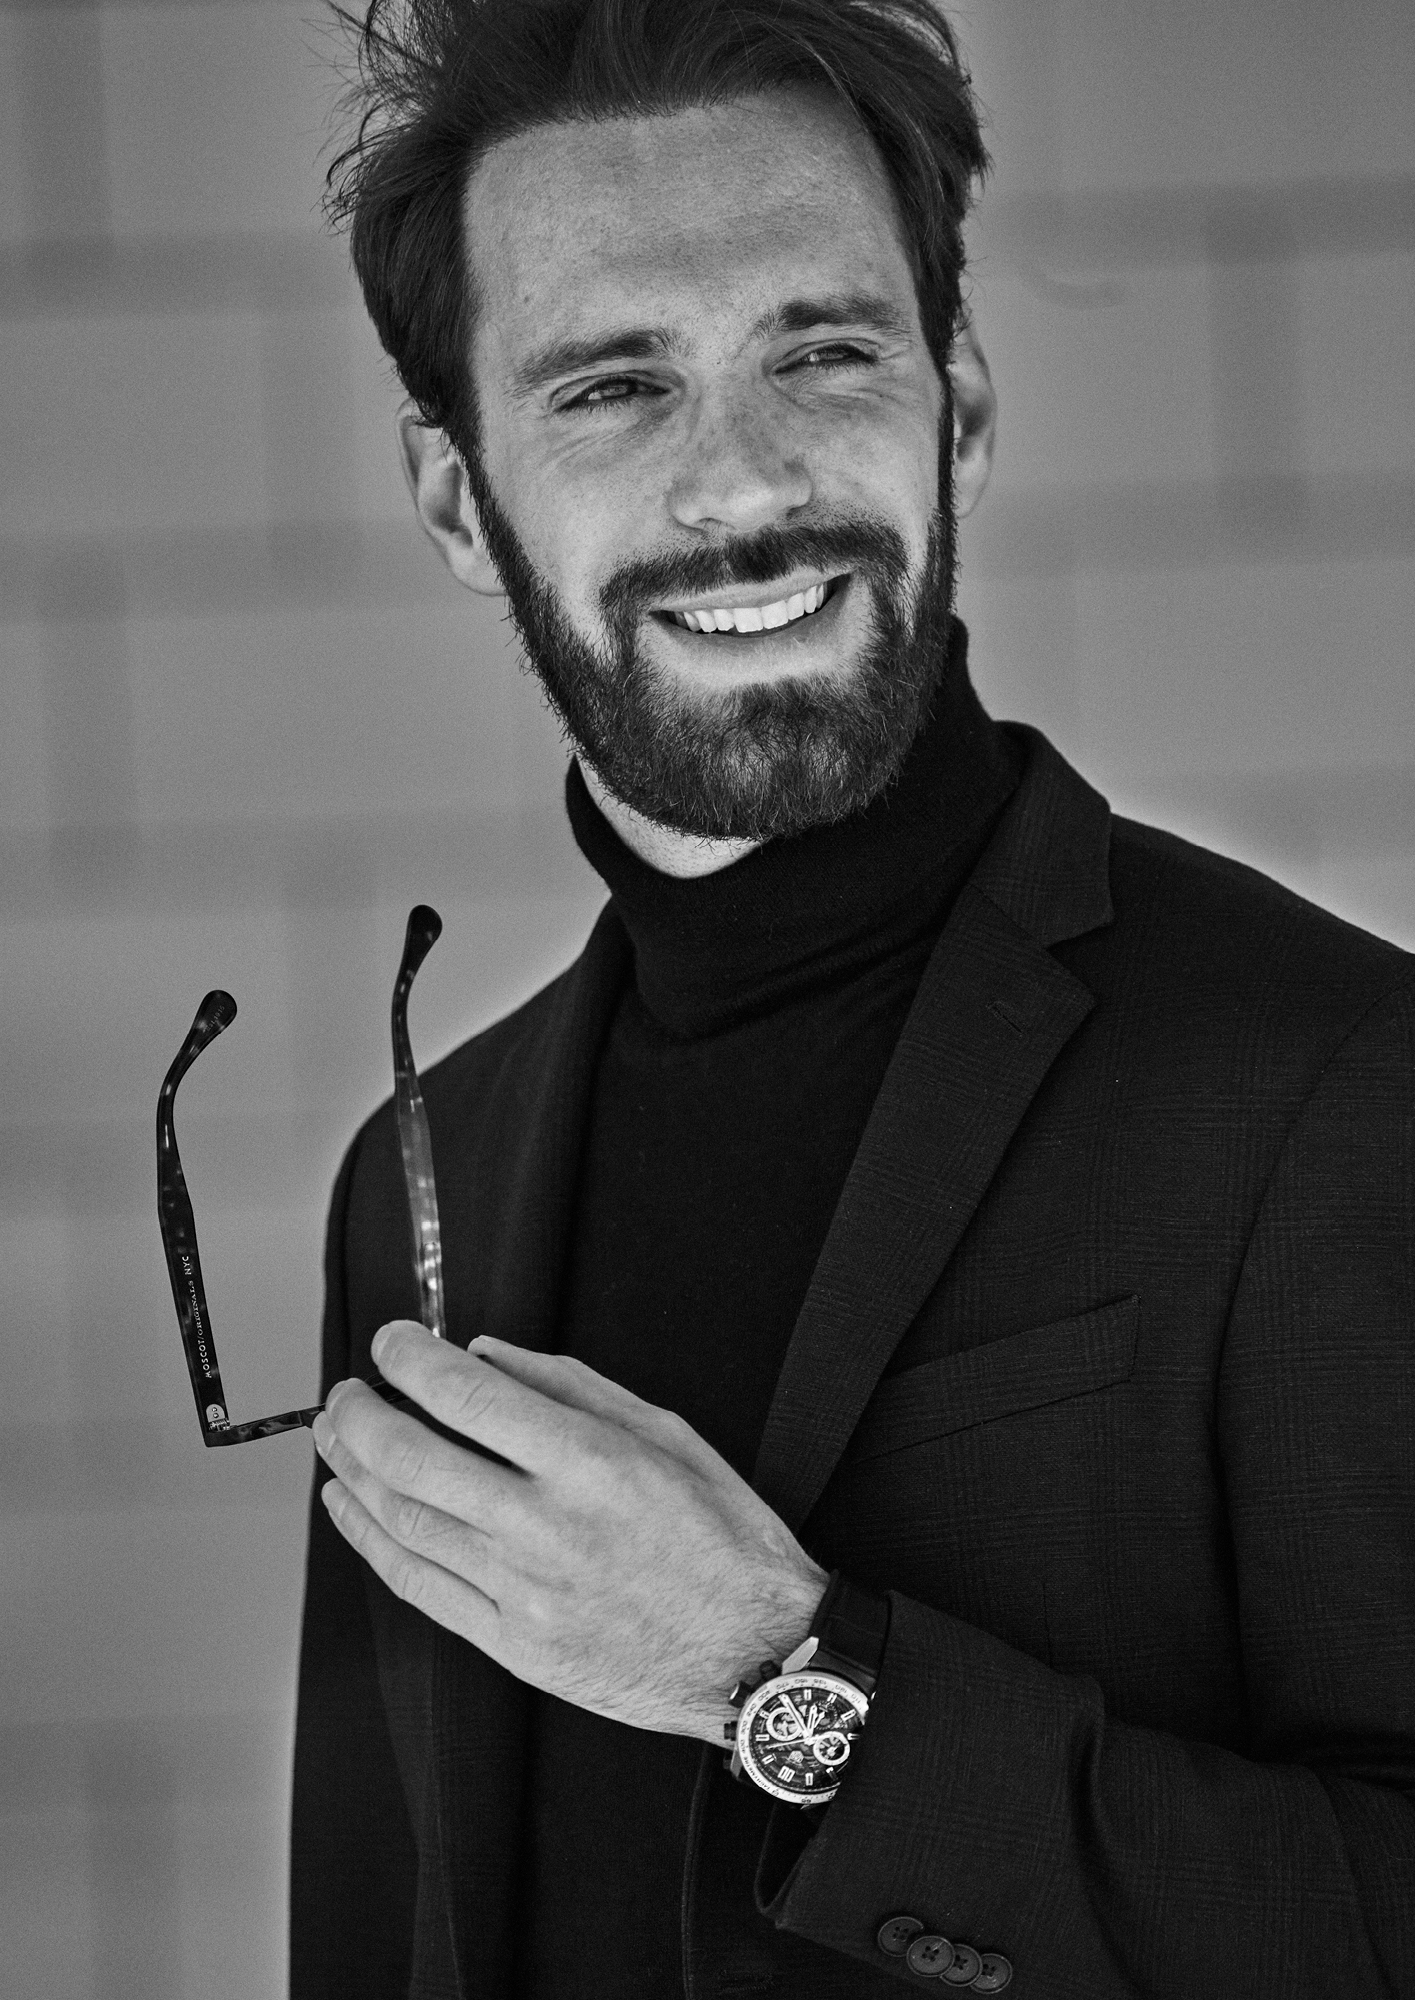 Jean-Éric Vergne Formula E driver wearing TAG Heuer watch